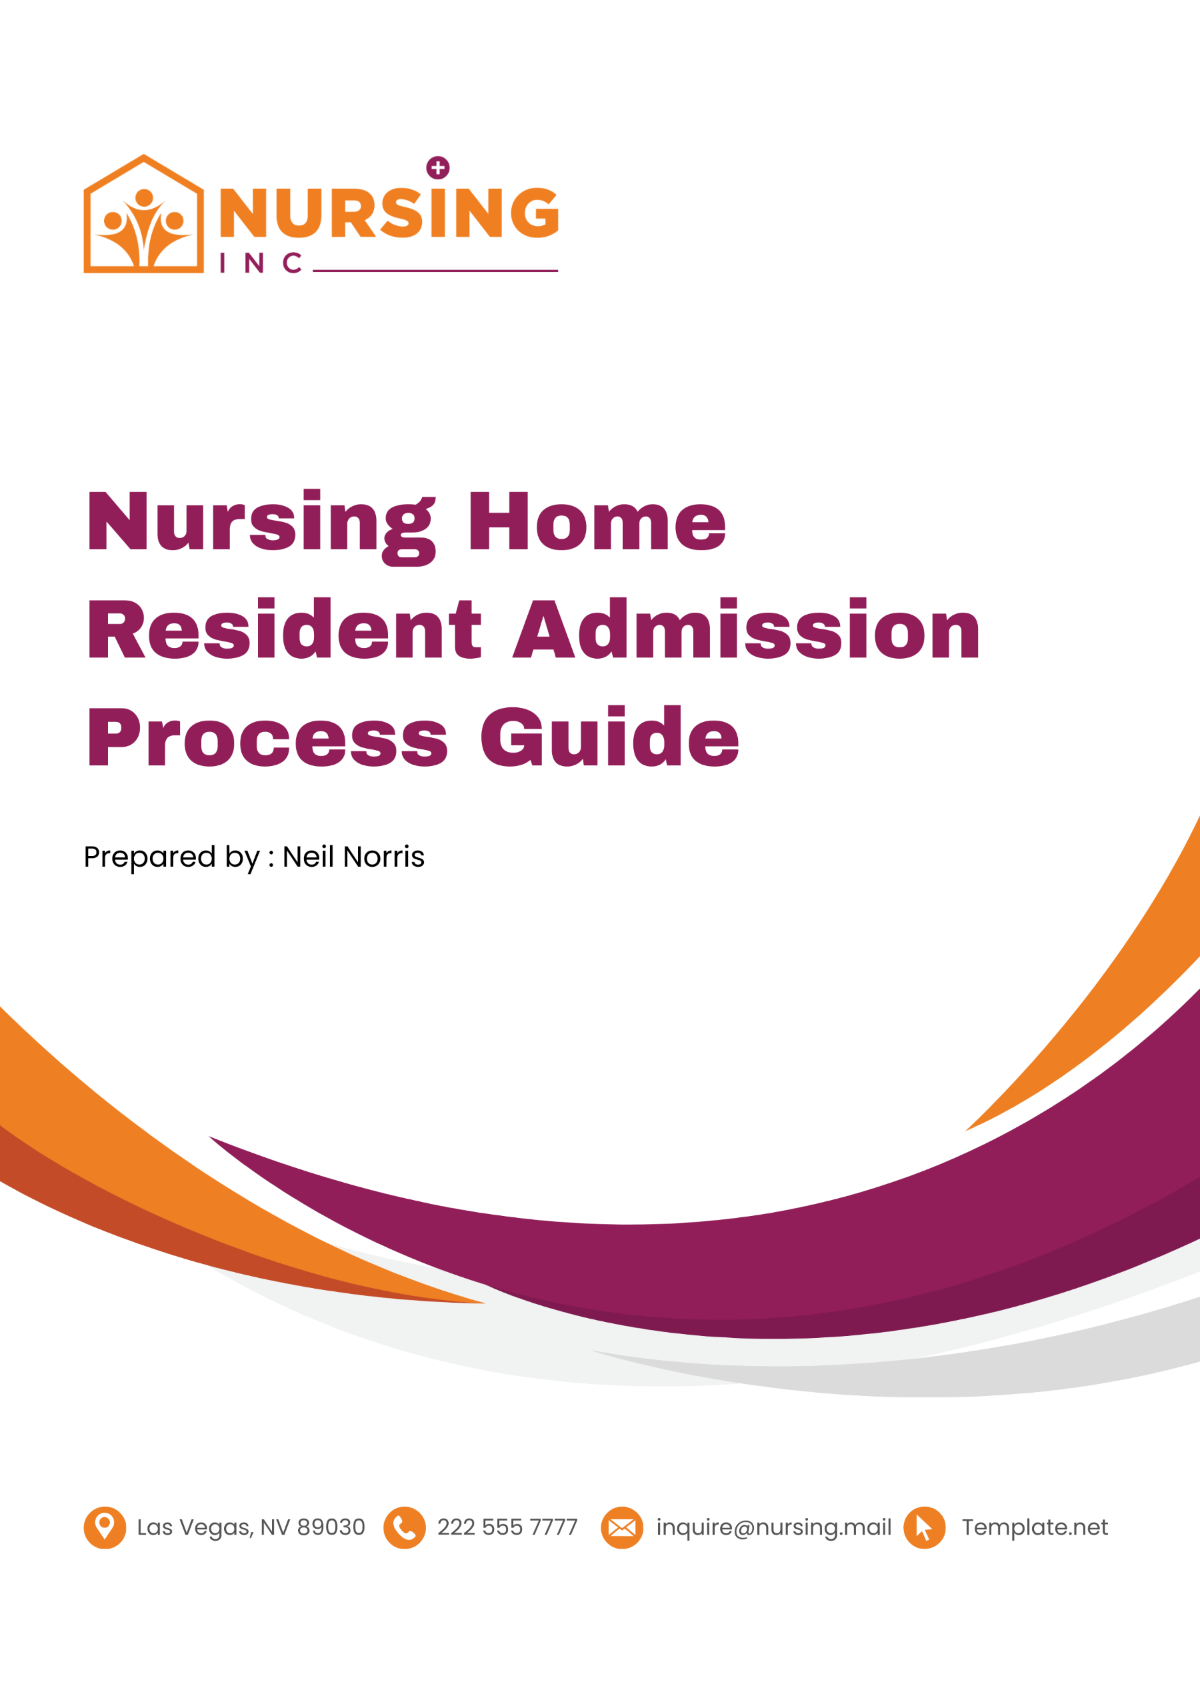 Nursing Home Resident Admission Process Guide Template